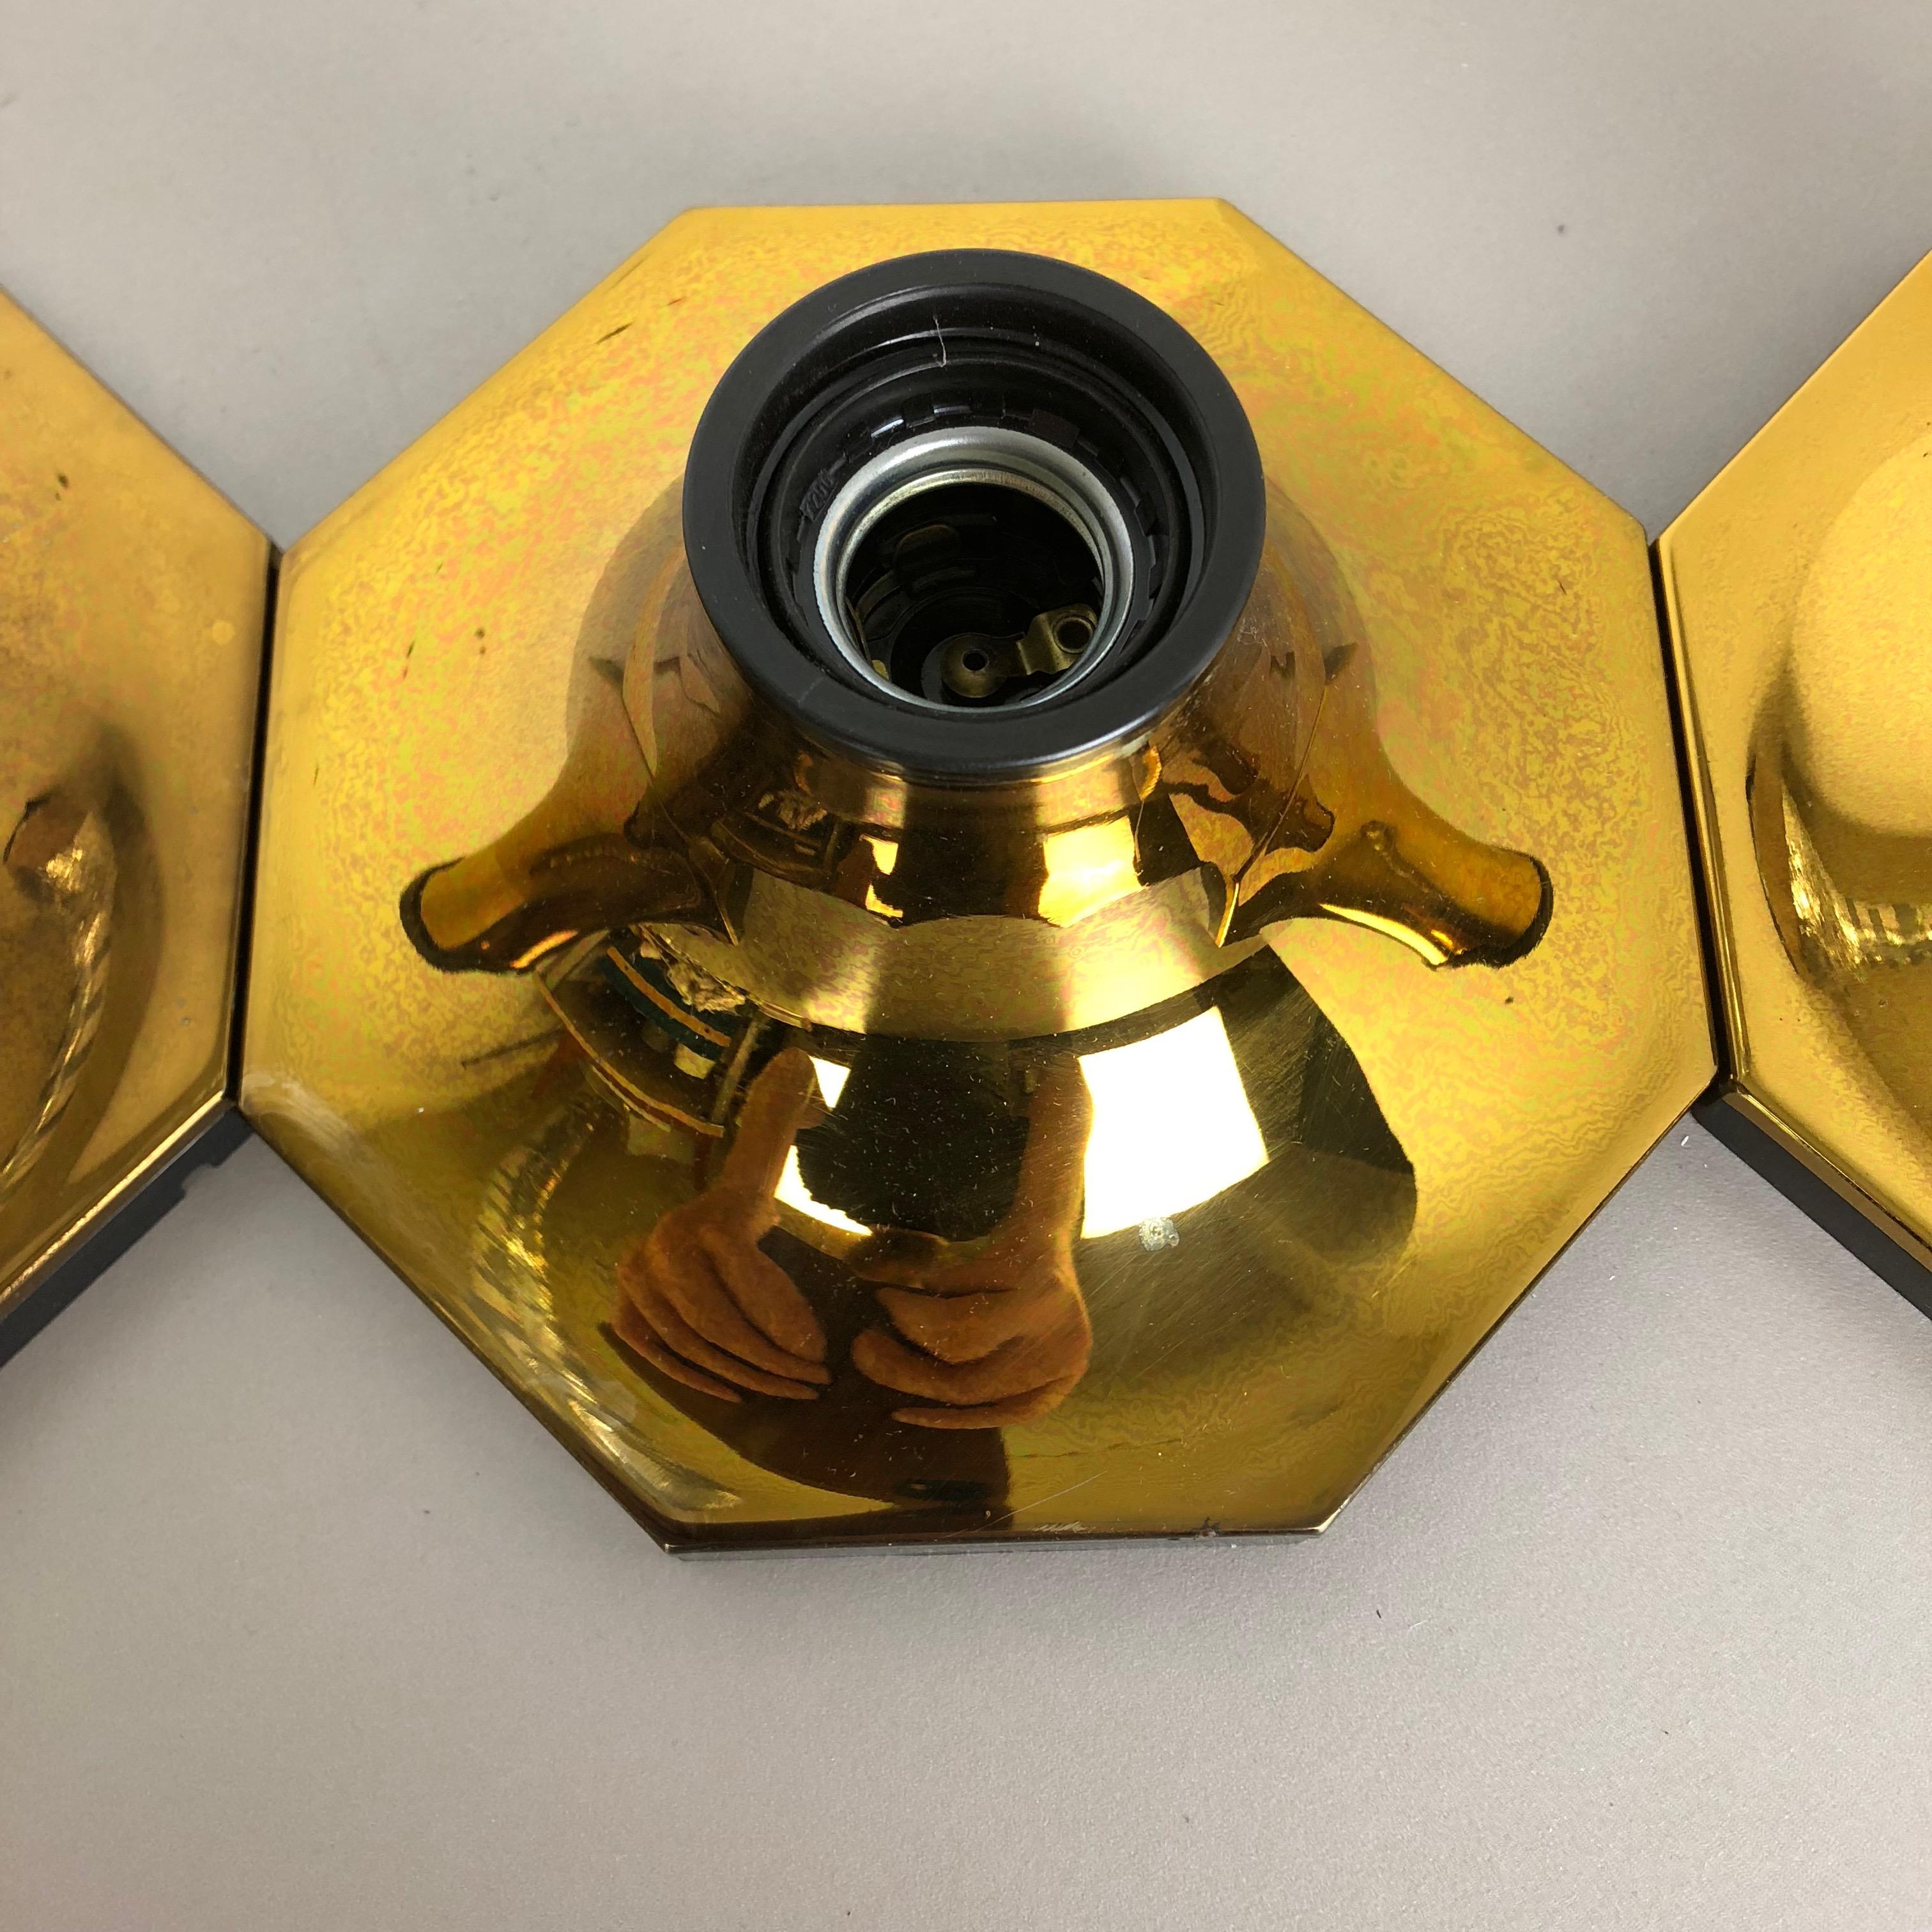 Set of Four Golden Cubic Wall Lights by Motoko Ishii for Staff Lights, 1970 8